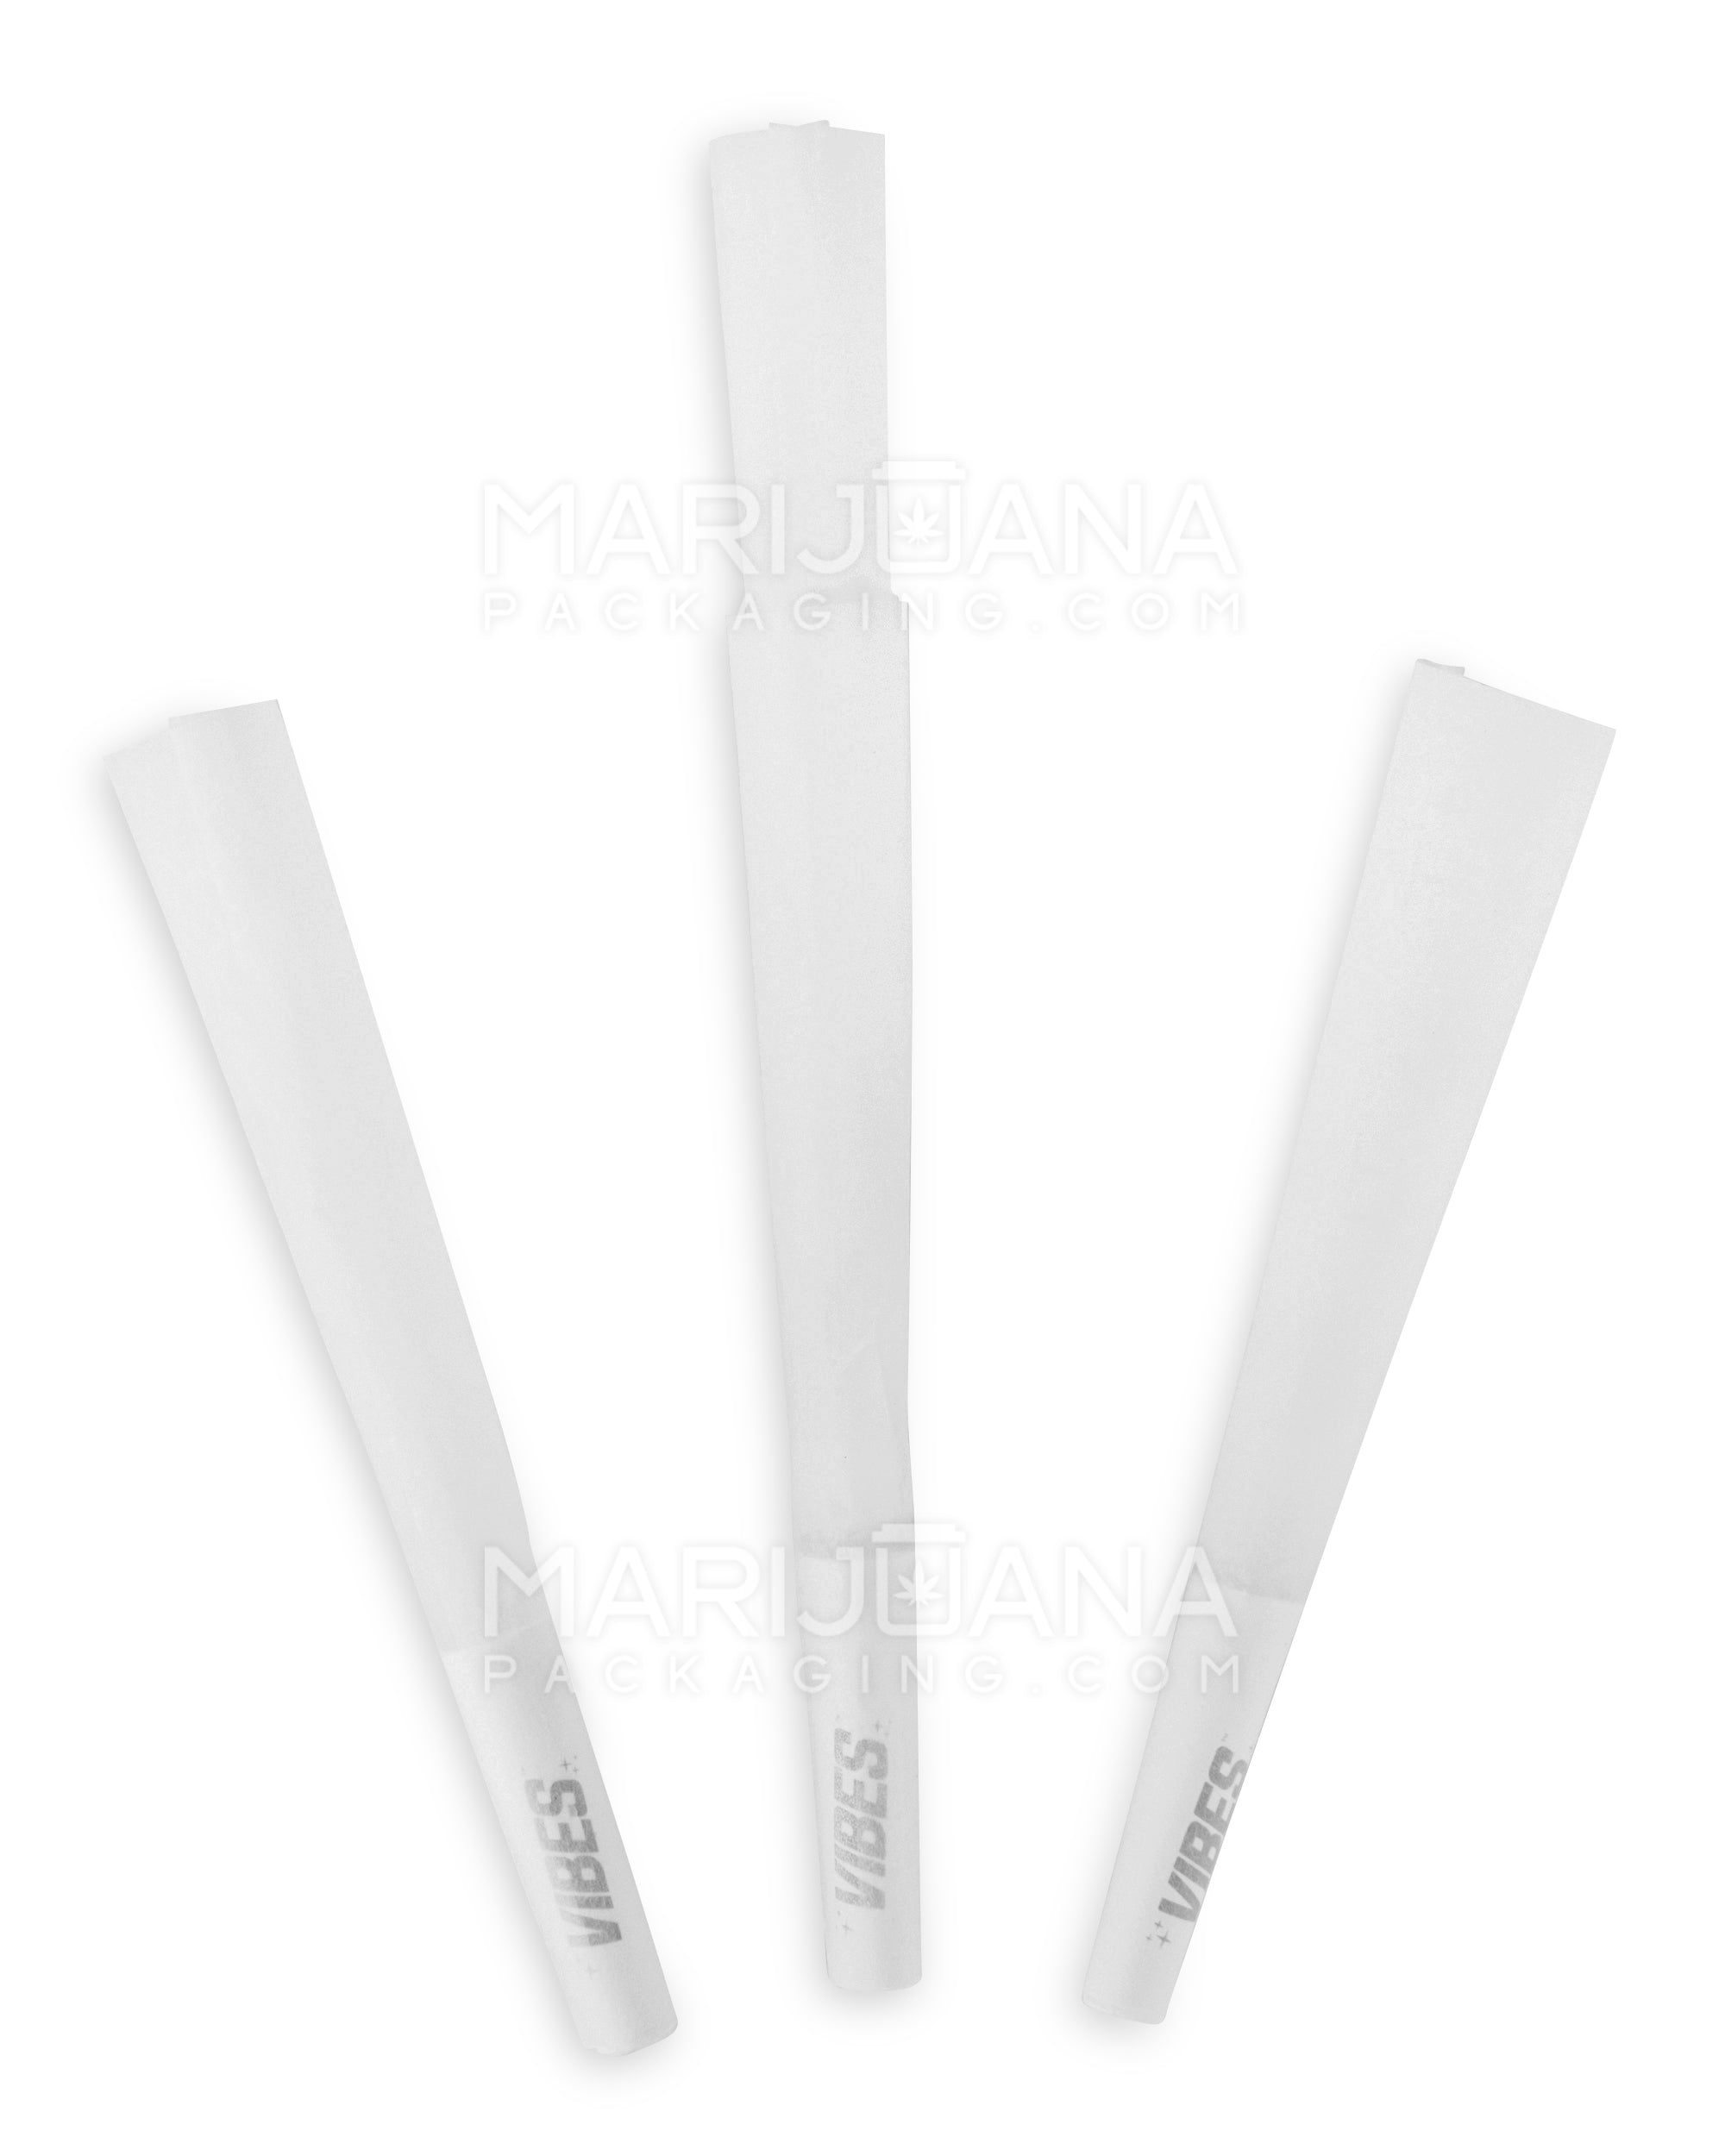 VIBES | 'Retail Display' 1 1/4 Size Rice Pre-Rolled Cones | 84mm - Rice Paper - 30 Count - 3